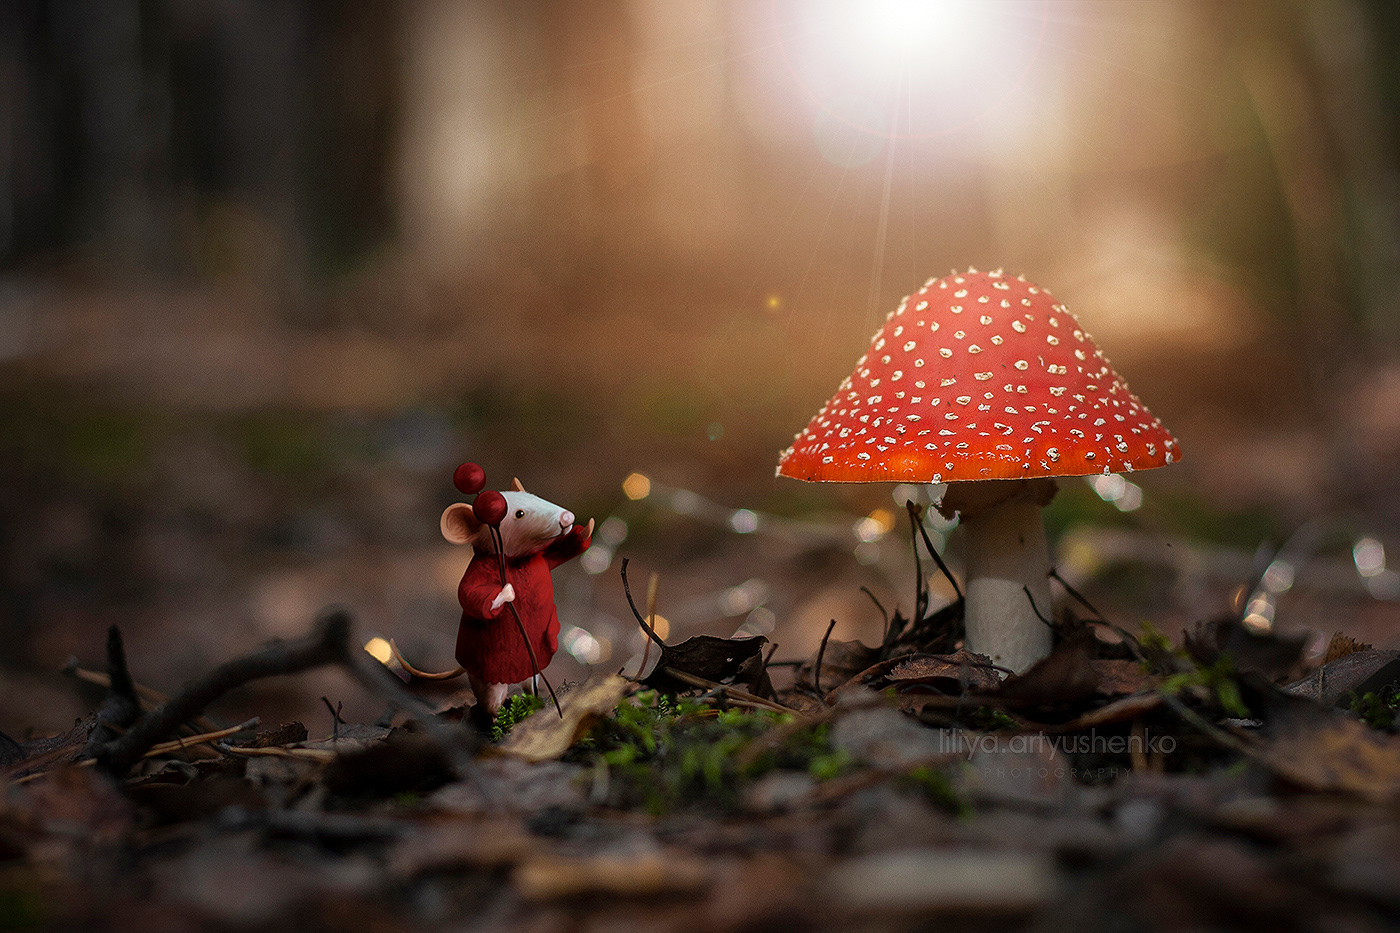 augmented reality collage forest mushroom photo